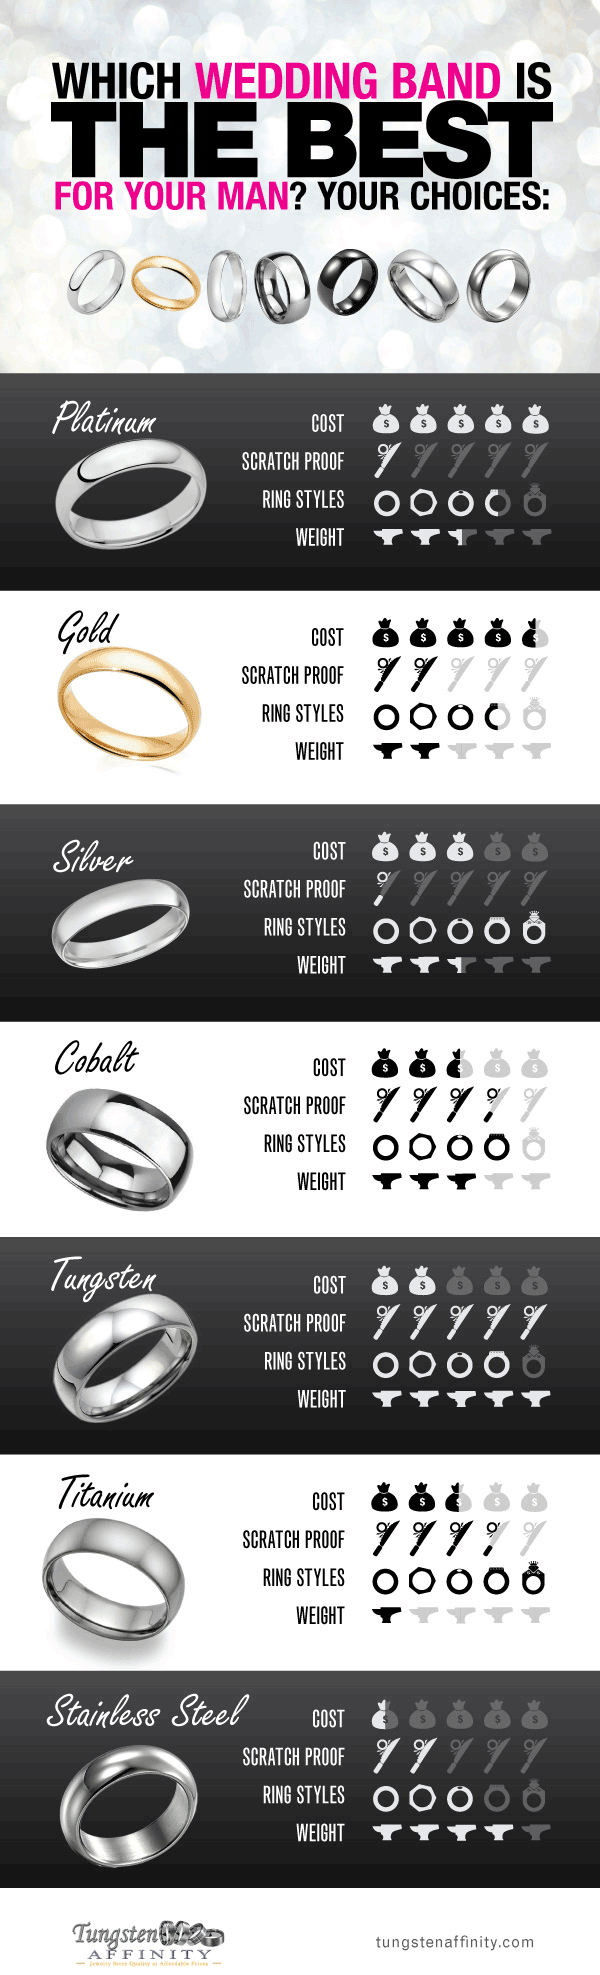 Find-out-What-Metal-is-the-Best-for-Your-Man's-Wedding-Band!